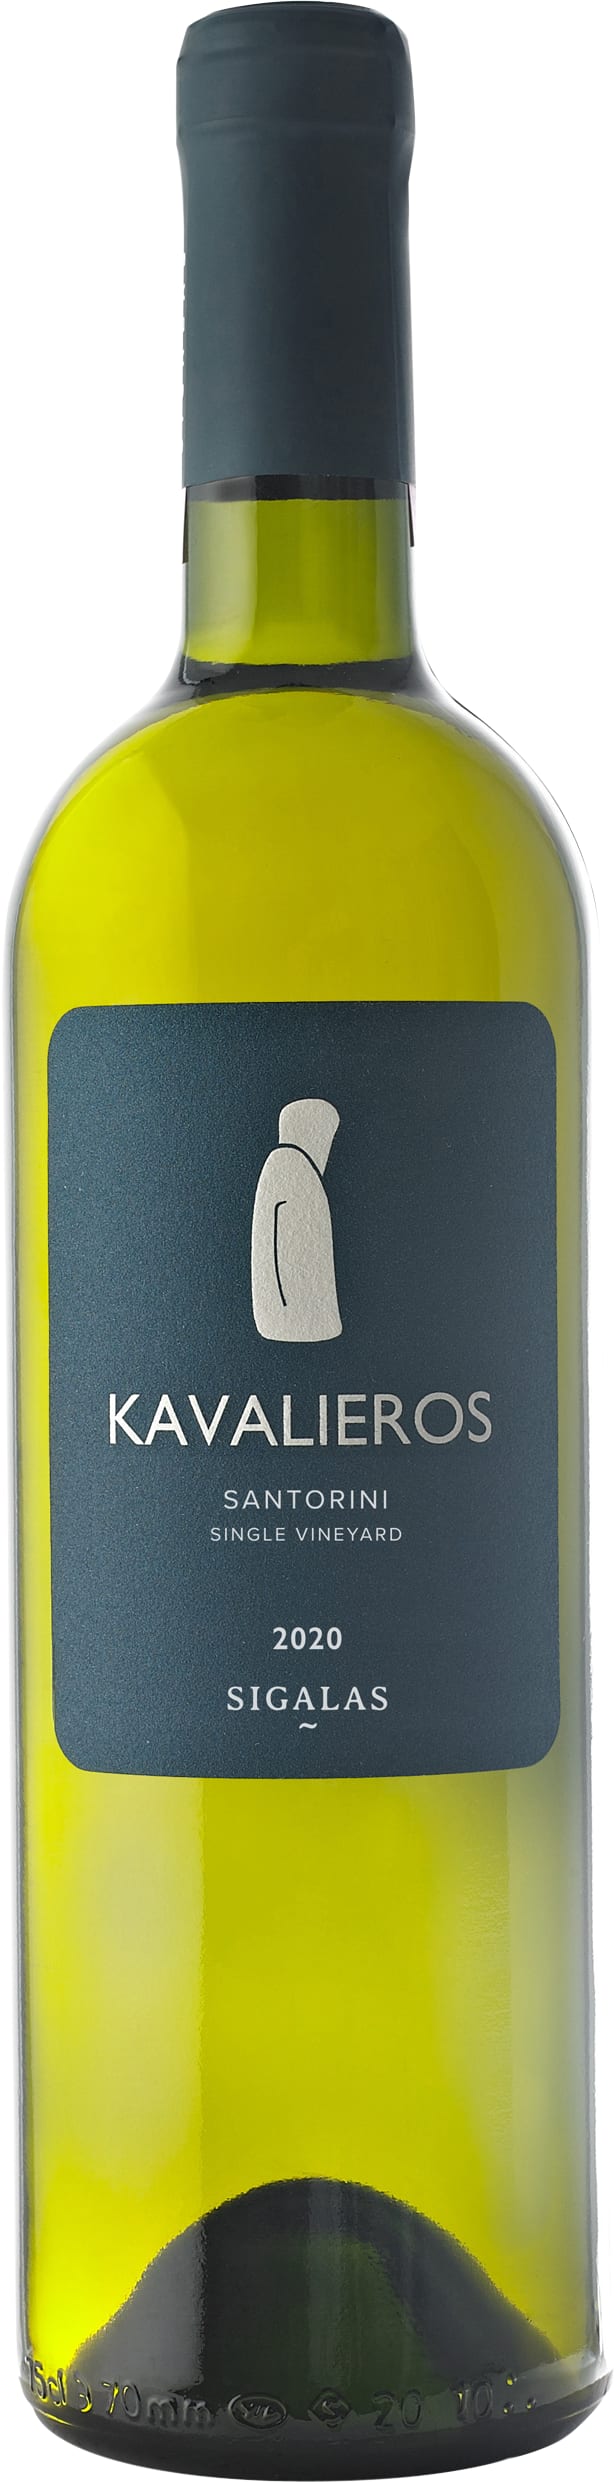 Sigalas Kavalieros 2020 75cl - Buy Sigalas Wines from GREAT WINES DIRECT wine shop